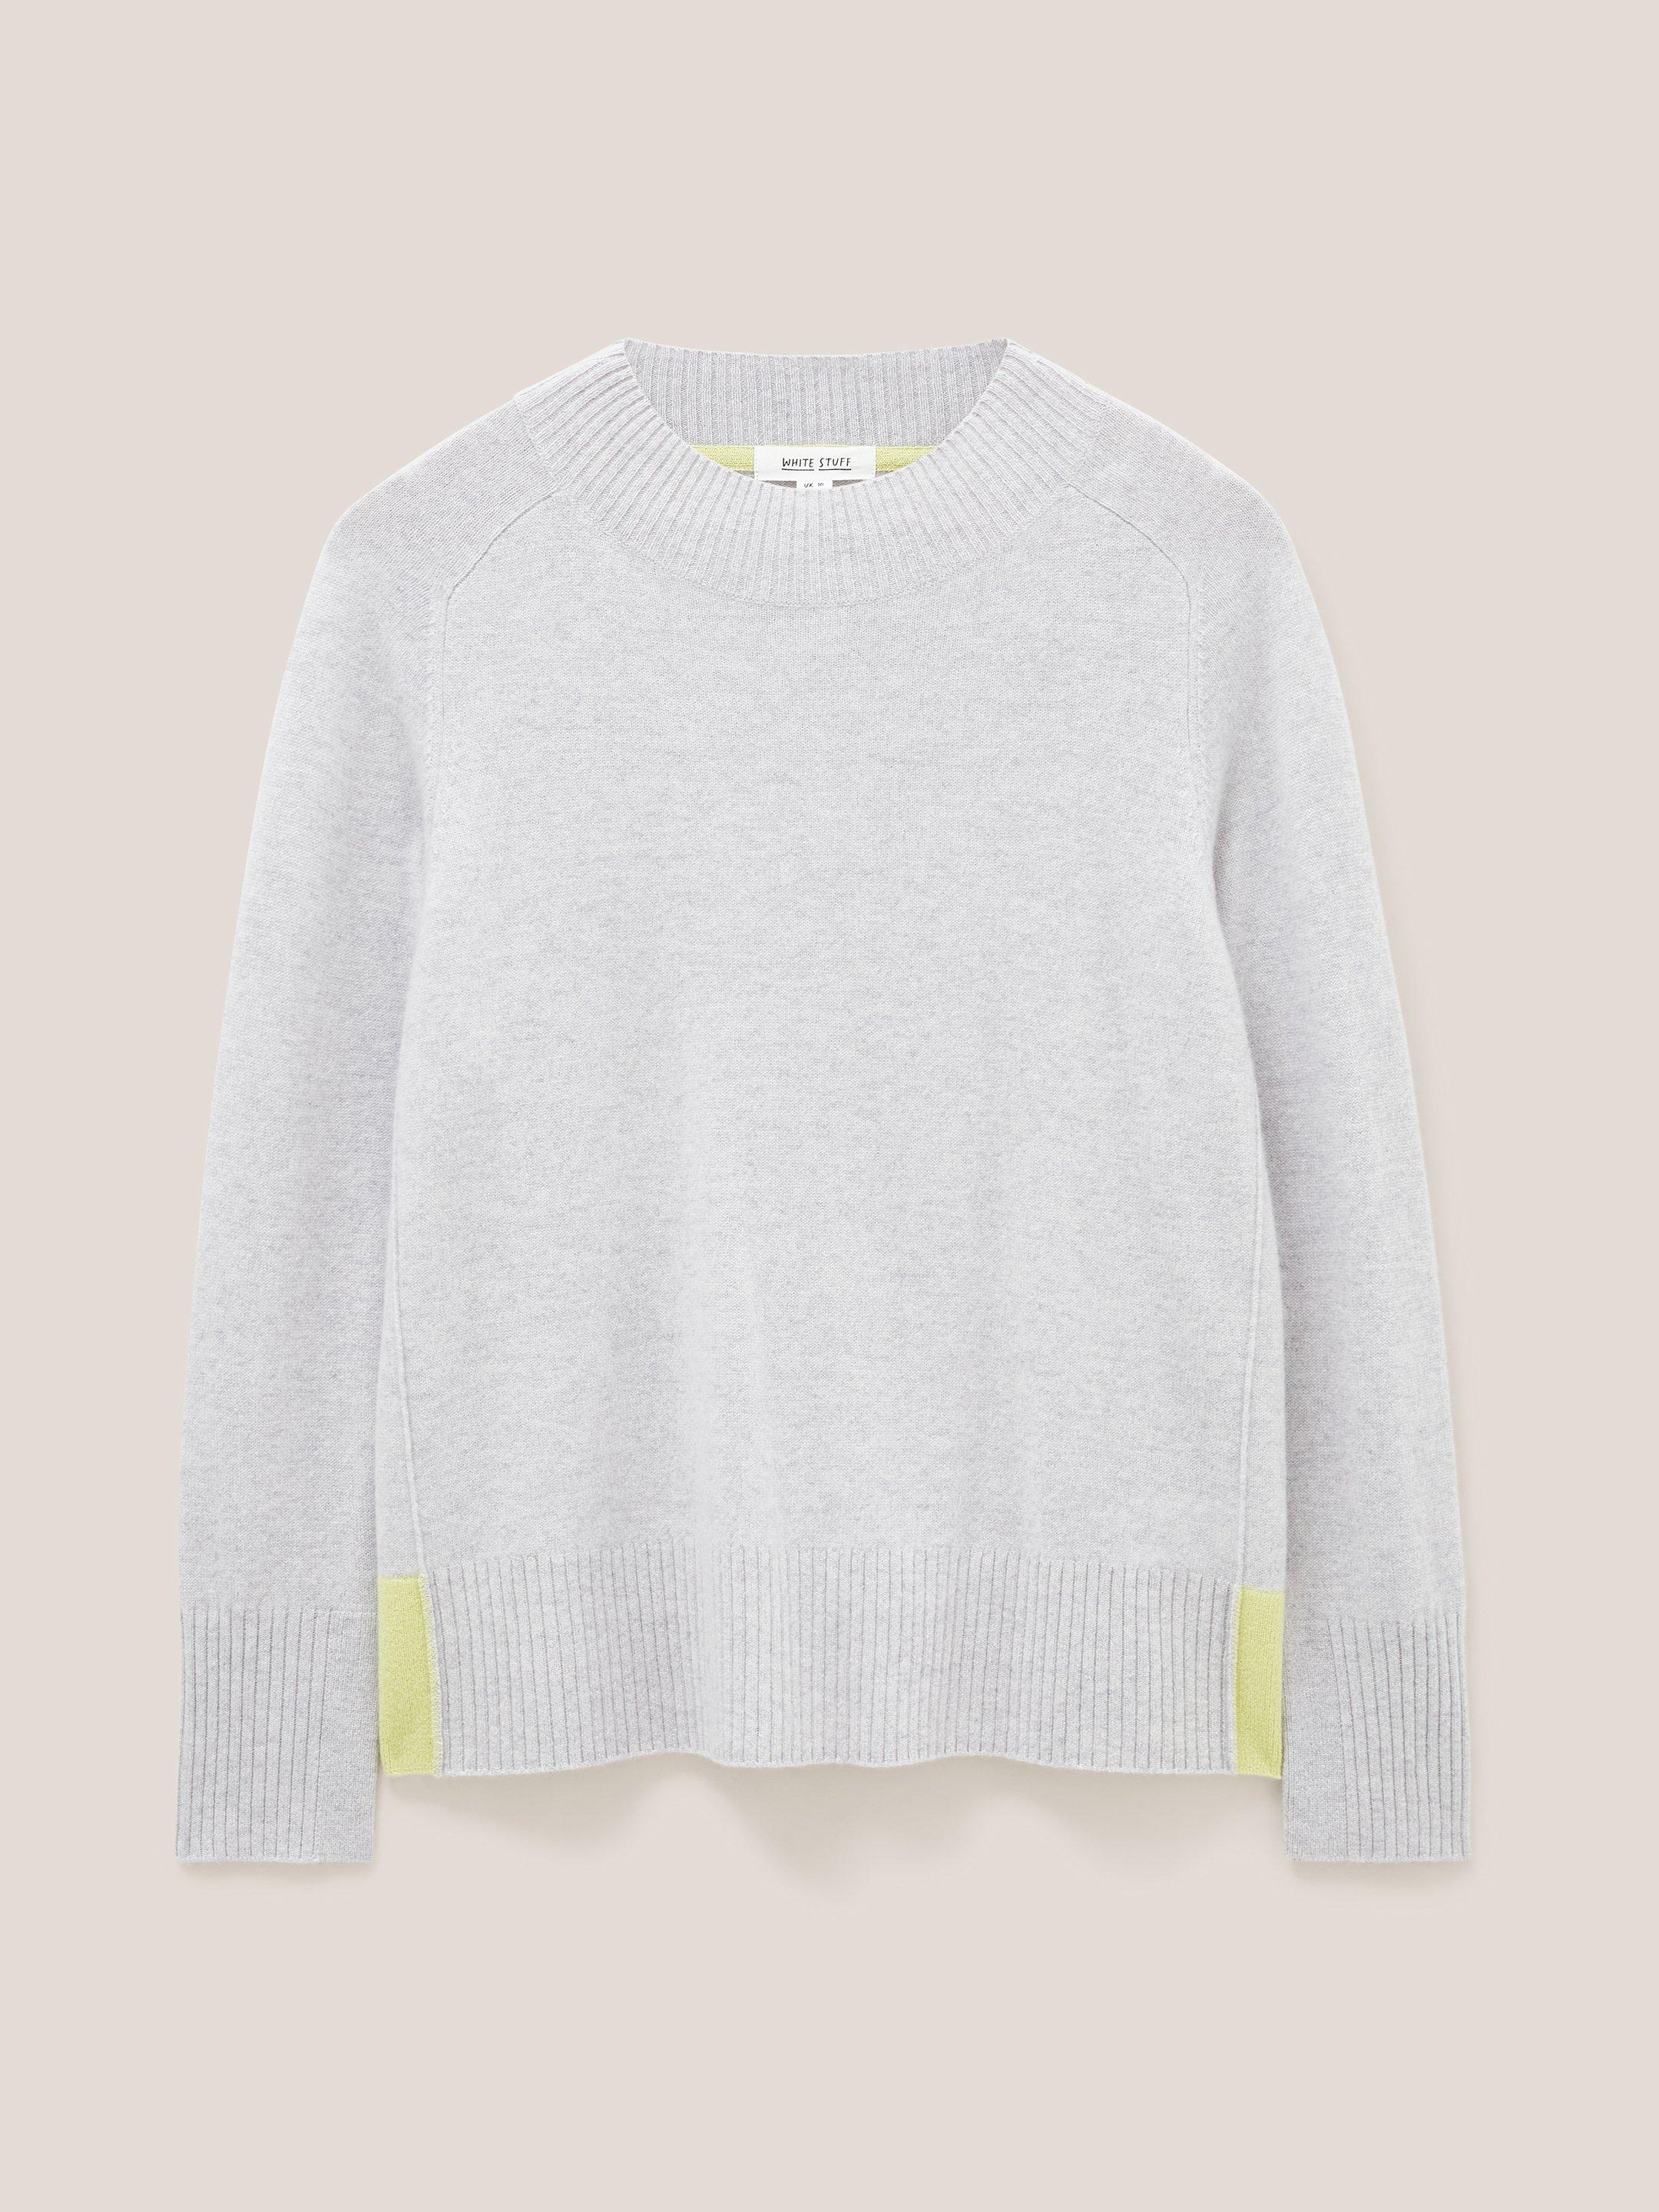 CORA CREW NECK CASHMERE JUMPER in MID GREY - FLAT FRONT